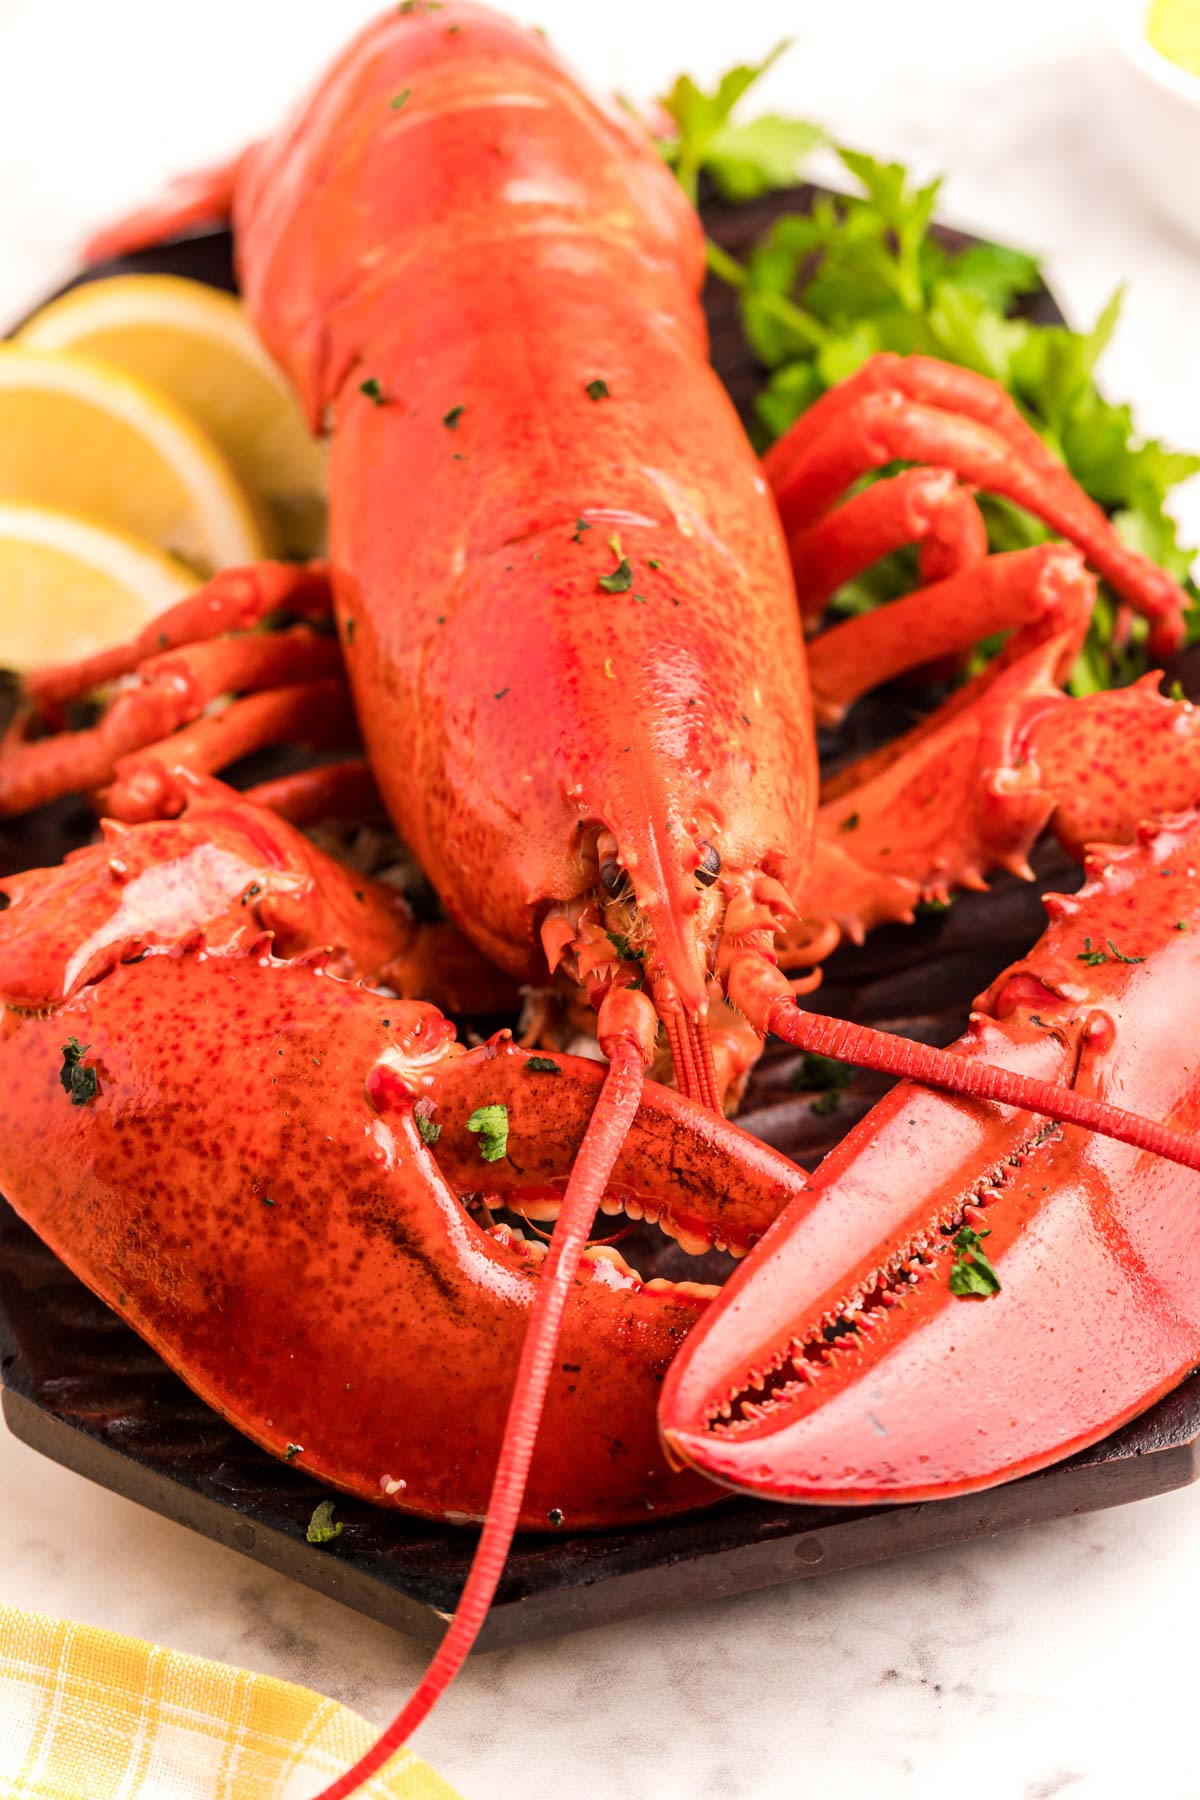 How to Steam a Whole Lobster + How to Eat It Too!